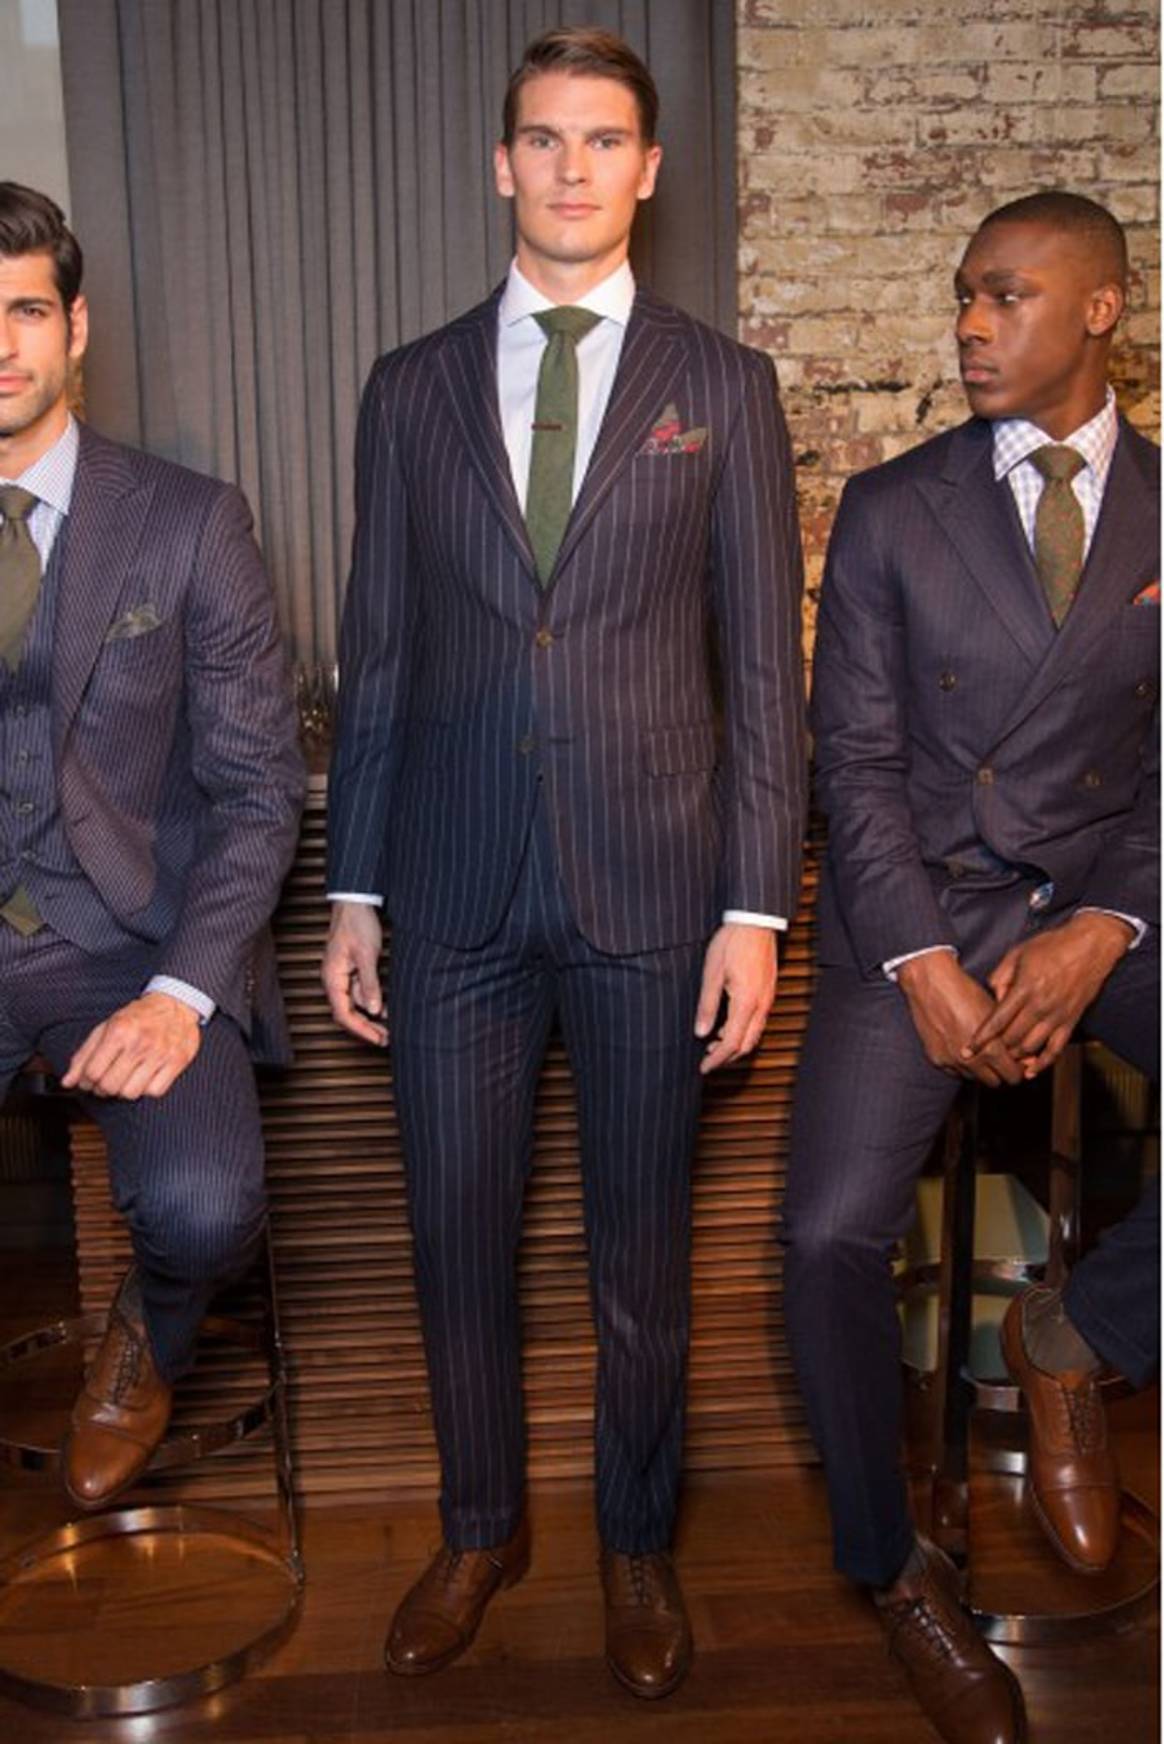 New York Fashion Week Men's: old school cool and originality